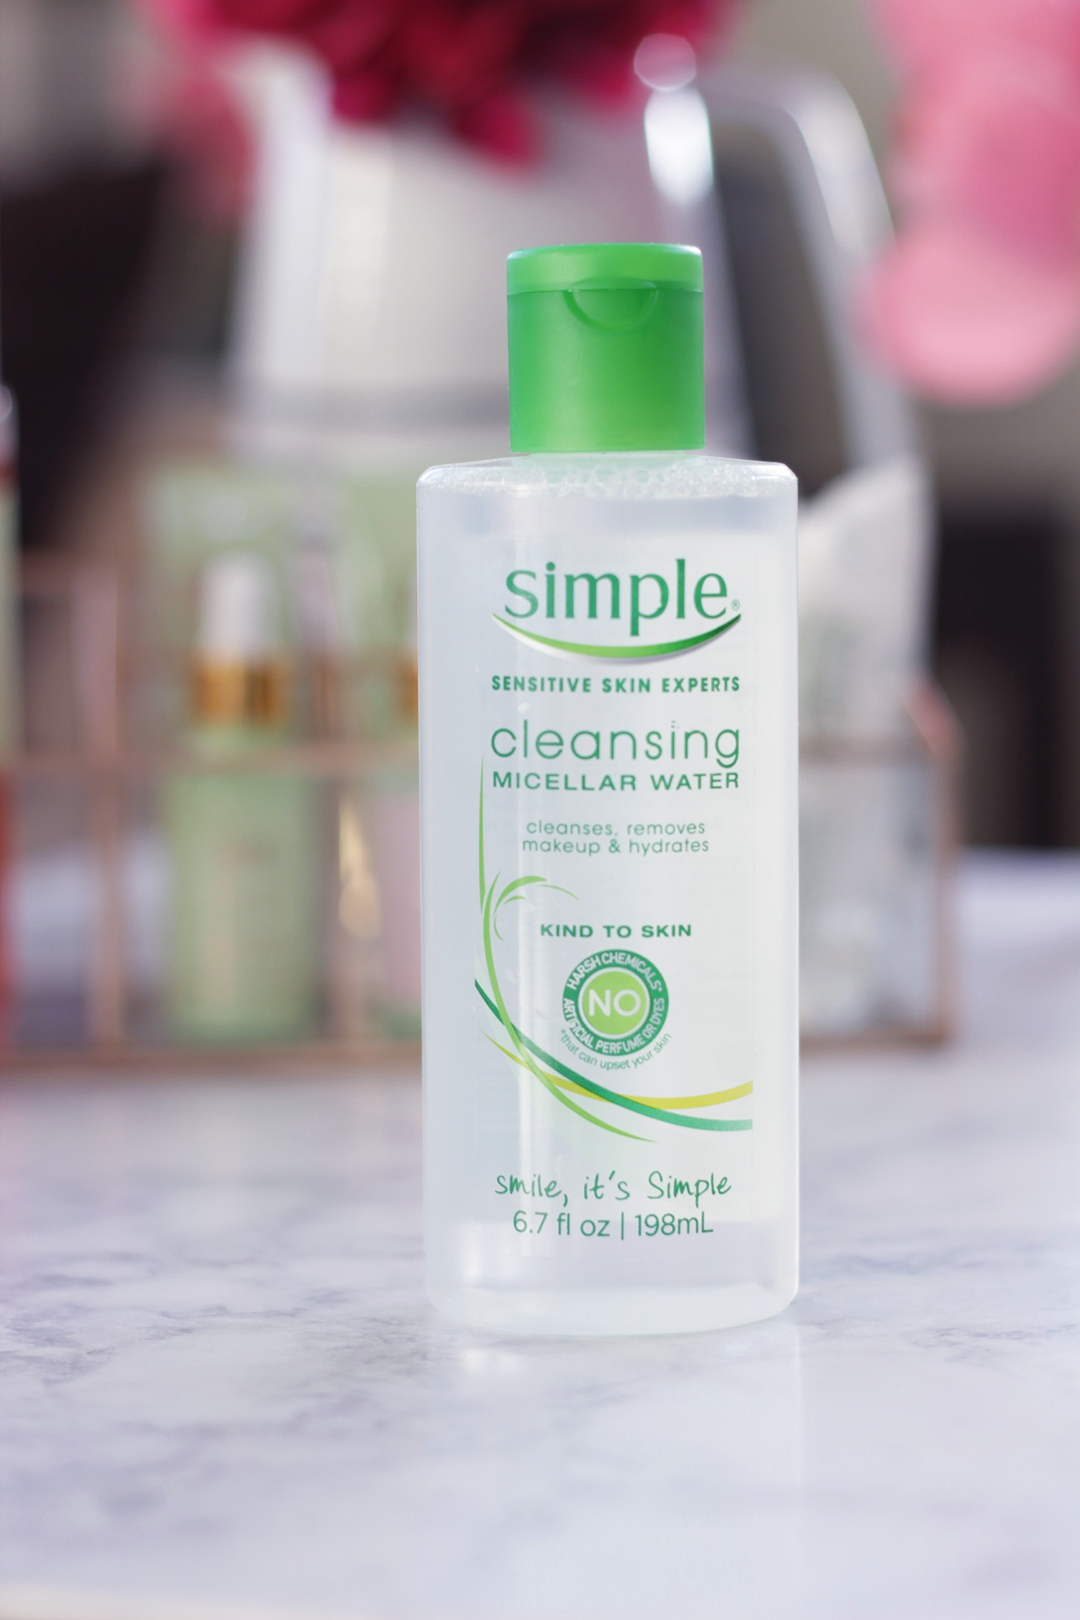 Confused about what new beautyb trend to try or what they exactly are? Keep reading as Jamie breaks down the new beauty buzzwords that have hit the beauty aisles- Makeup Life and Love-Beauty Buzzwords- Pixi Beauty- Simple Skincare Micellar Water- #TargetStyle - #ad - #mybeautybytarget